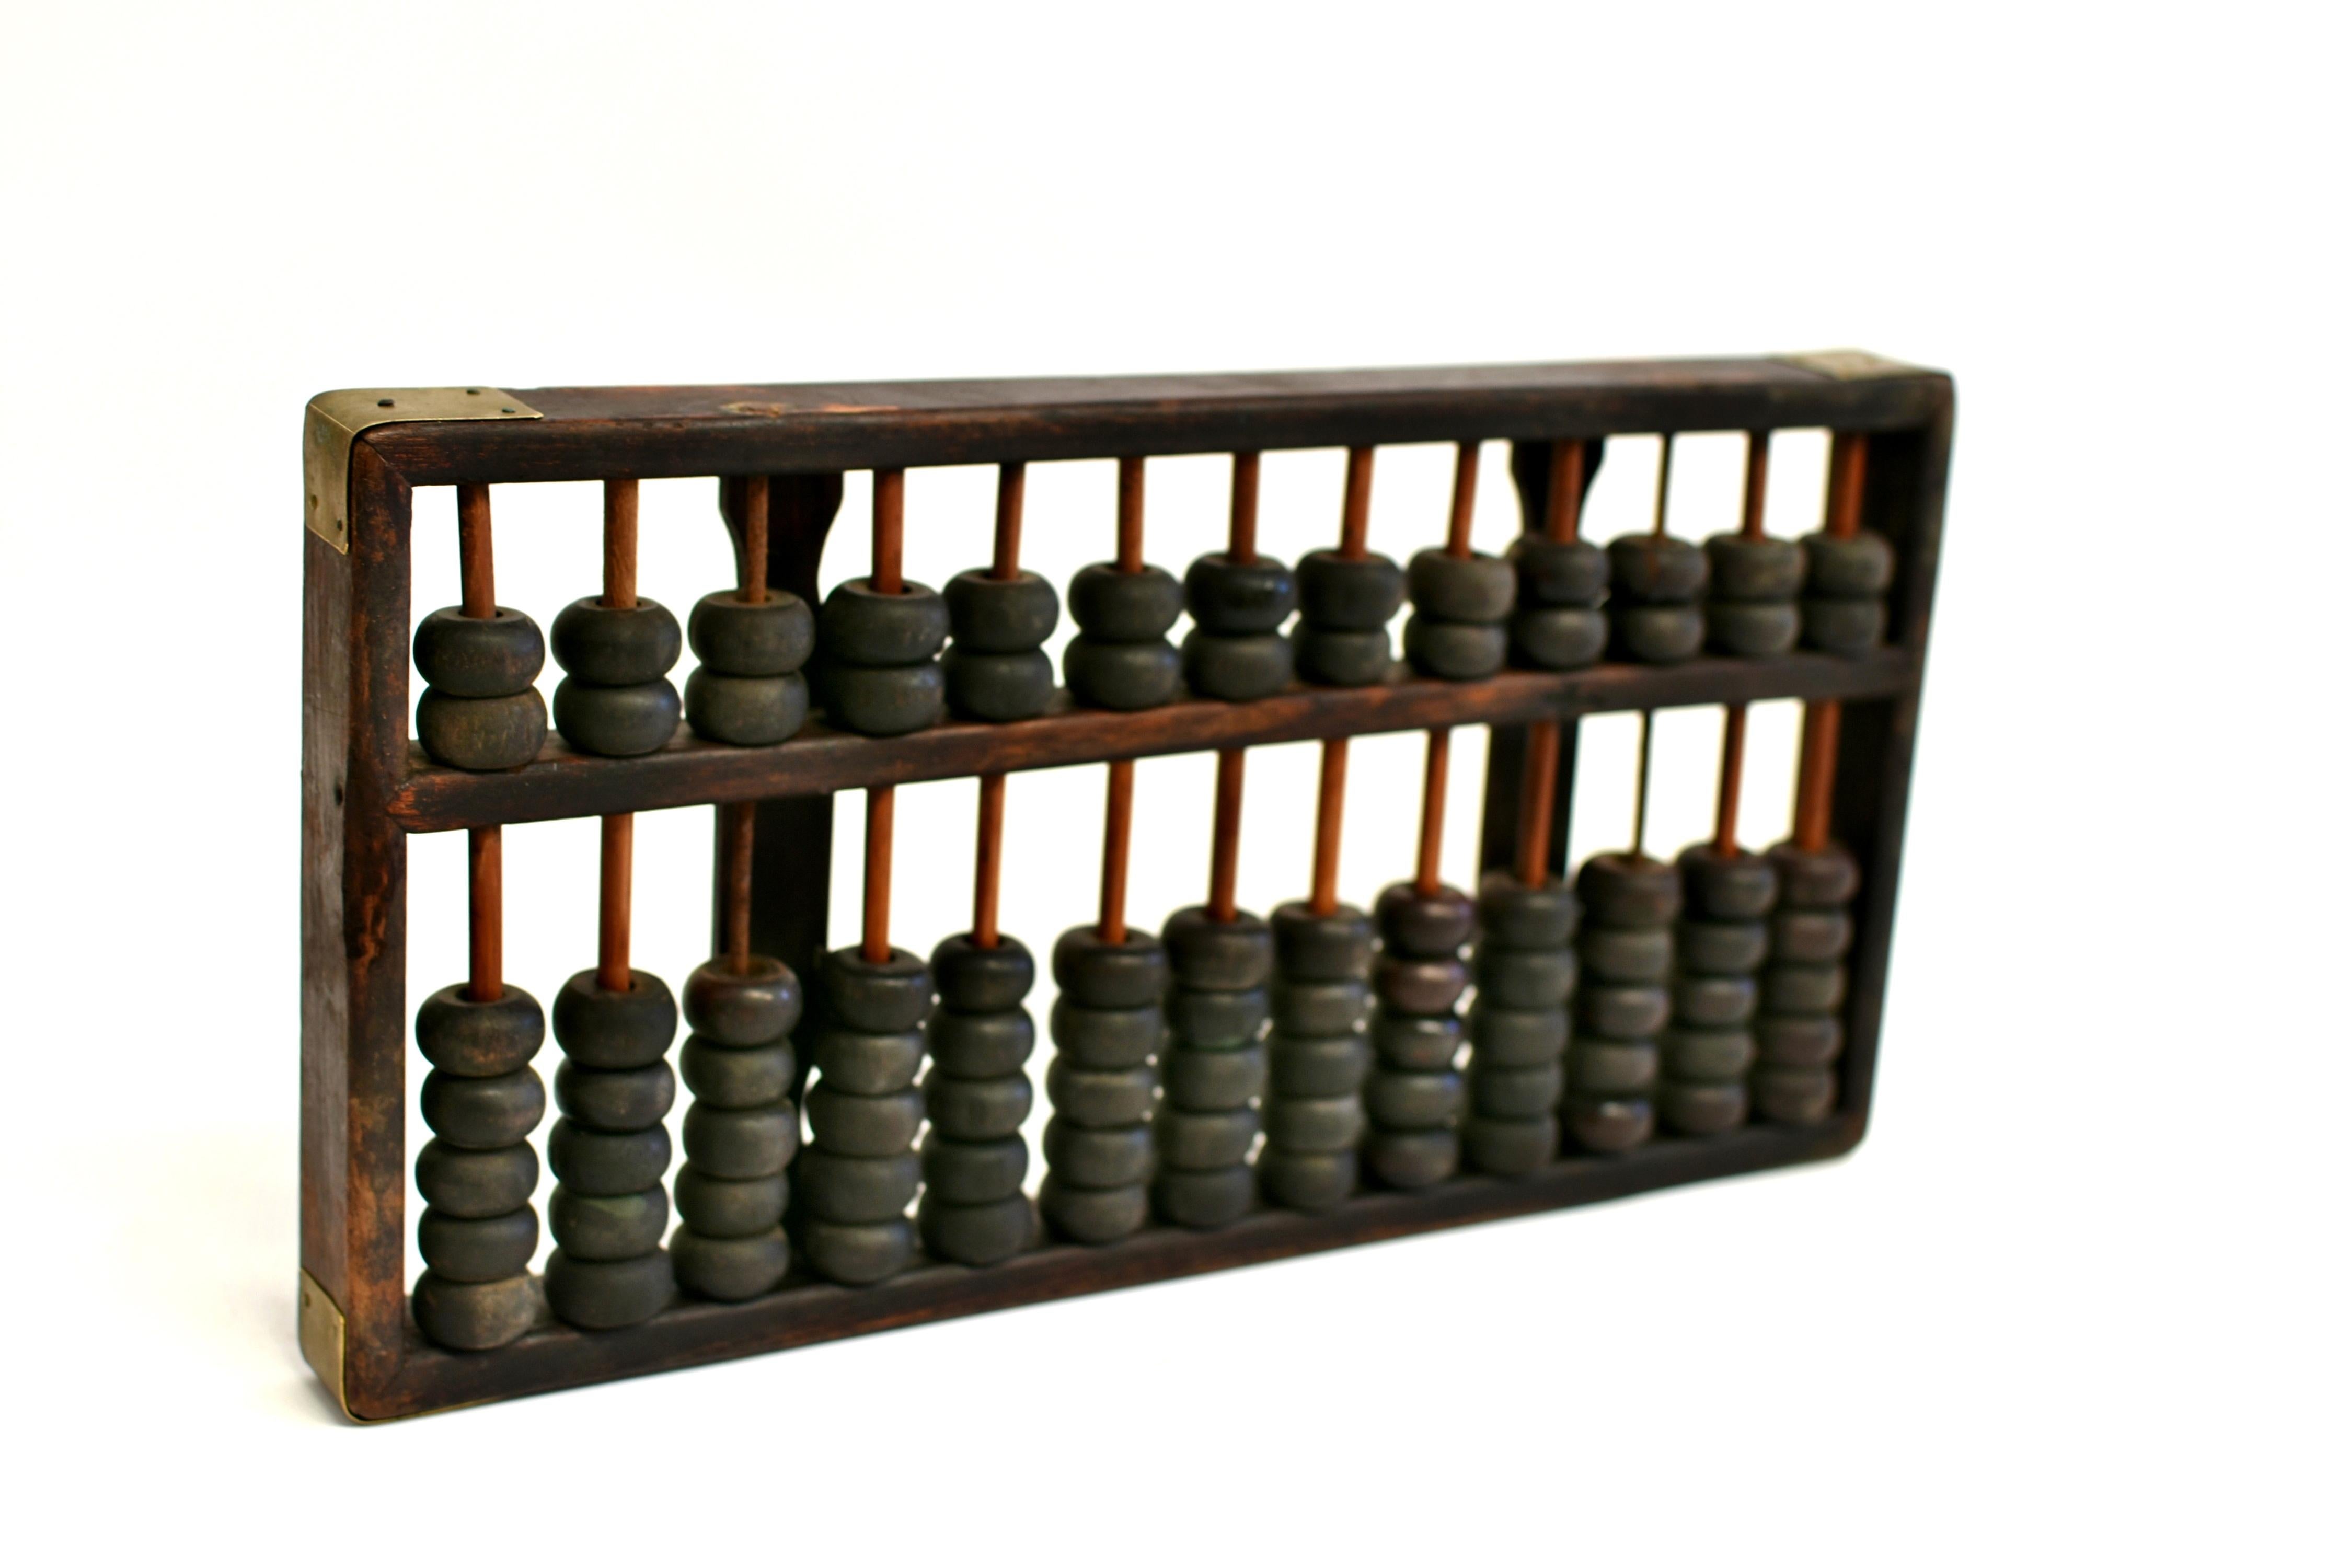 This is an authentic, original Chinese abacus that was actually used in the early 20th century. The Abacus being an ingenious calculator has been used in China for over a thousand years. Its accuracy and speed remains extraordinary till this day of